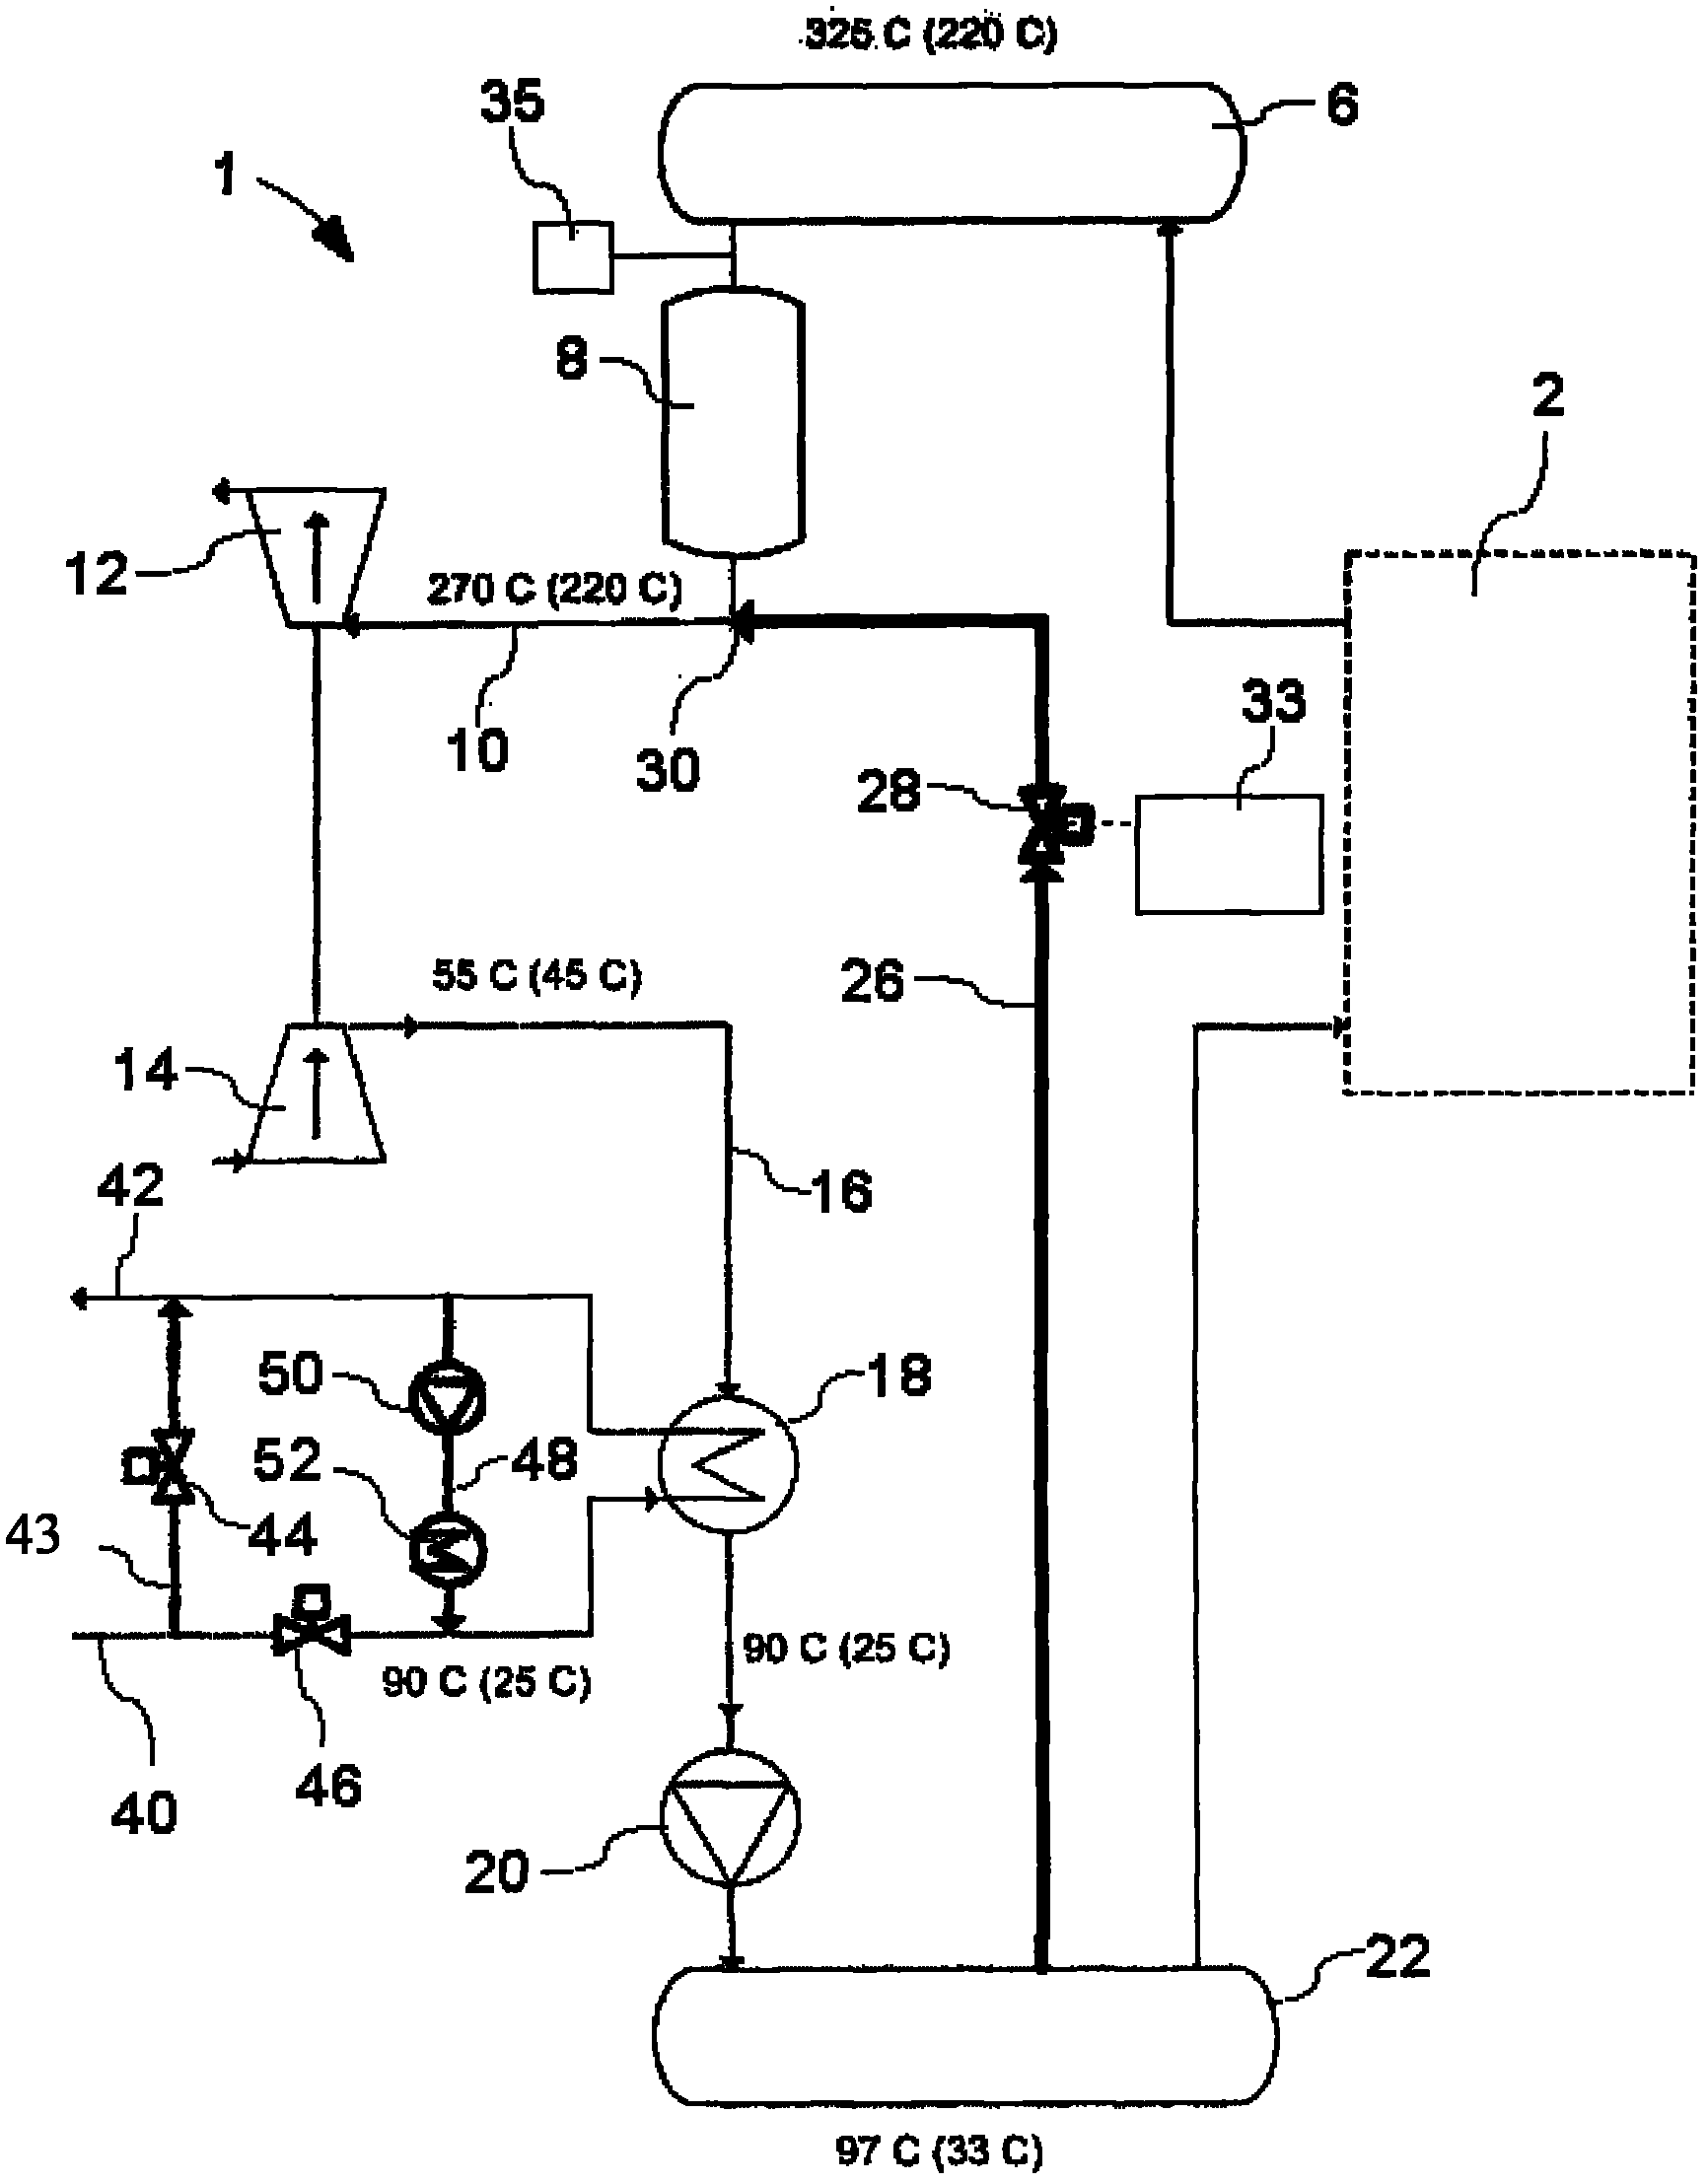 Large-sized two-stroke diesel engine having exhaust gas purifying system